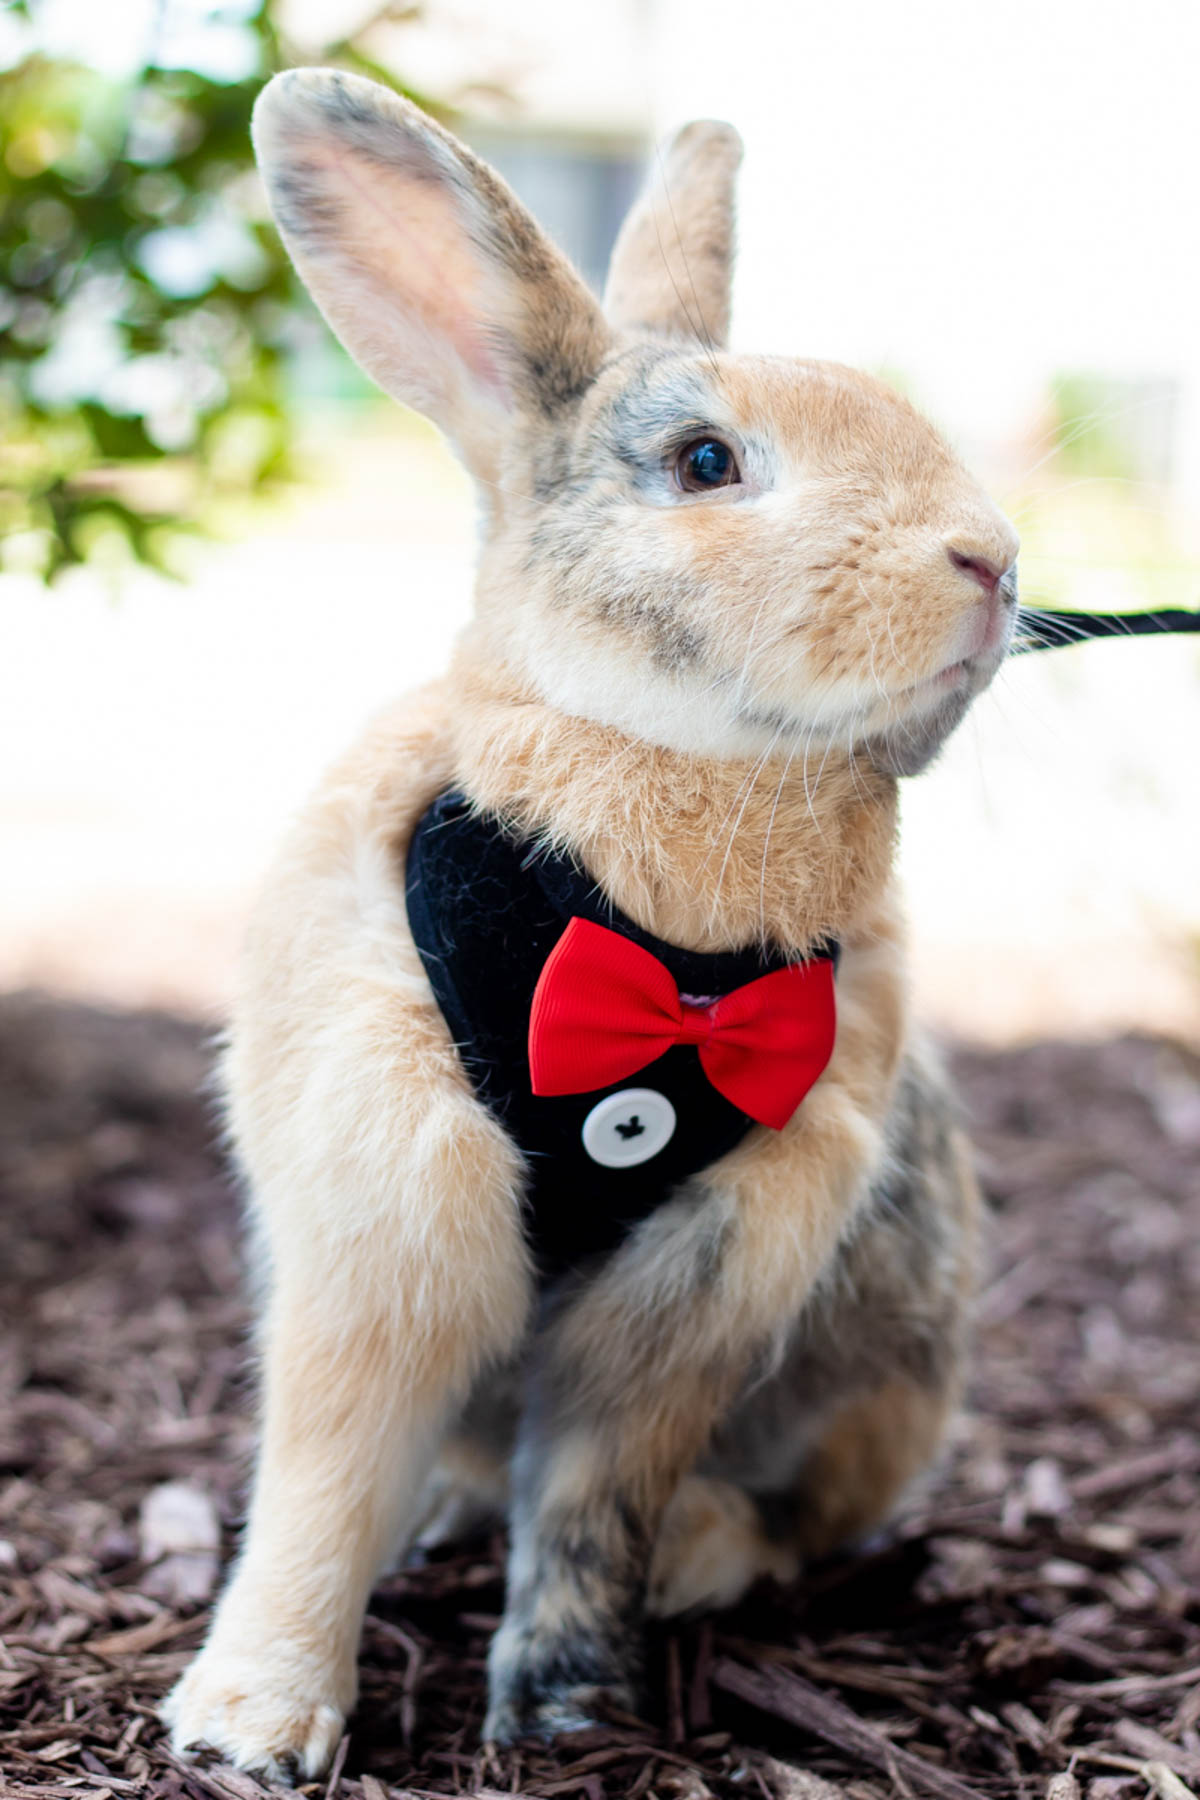 Rabbit As A Pet: 7 Great Reasons You Should Own One